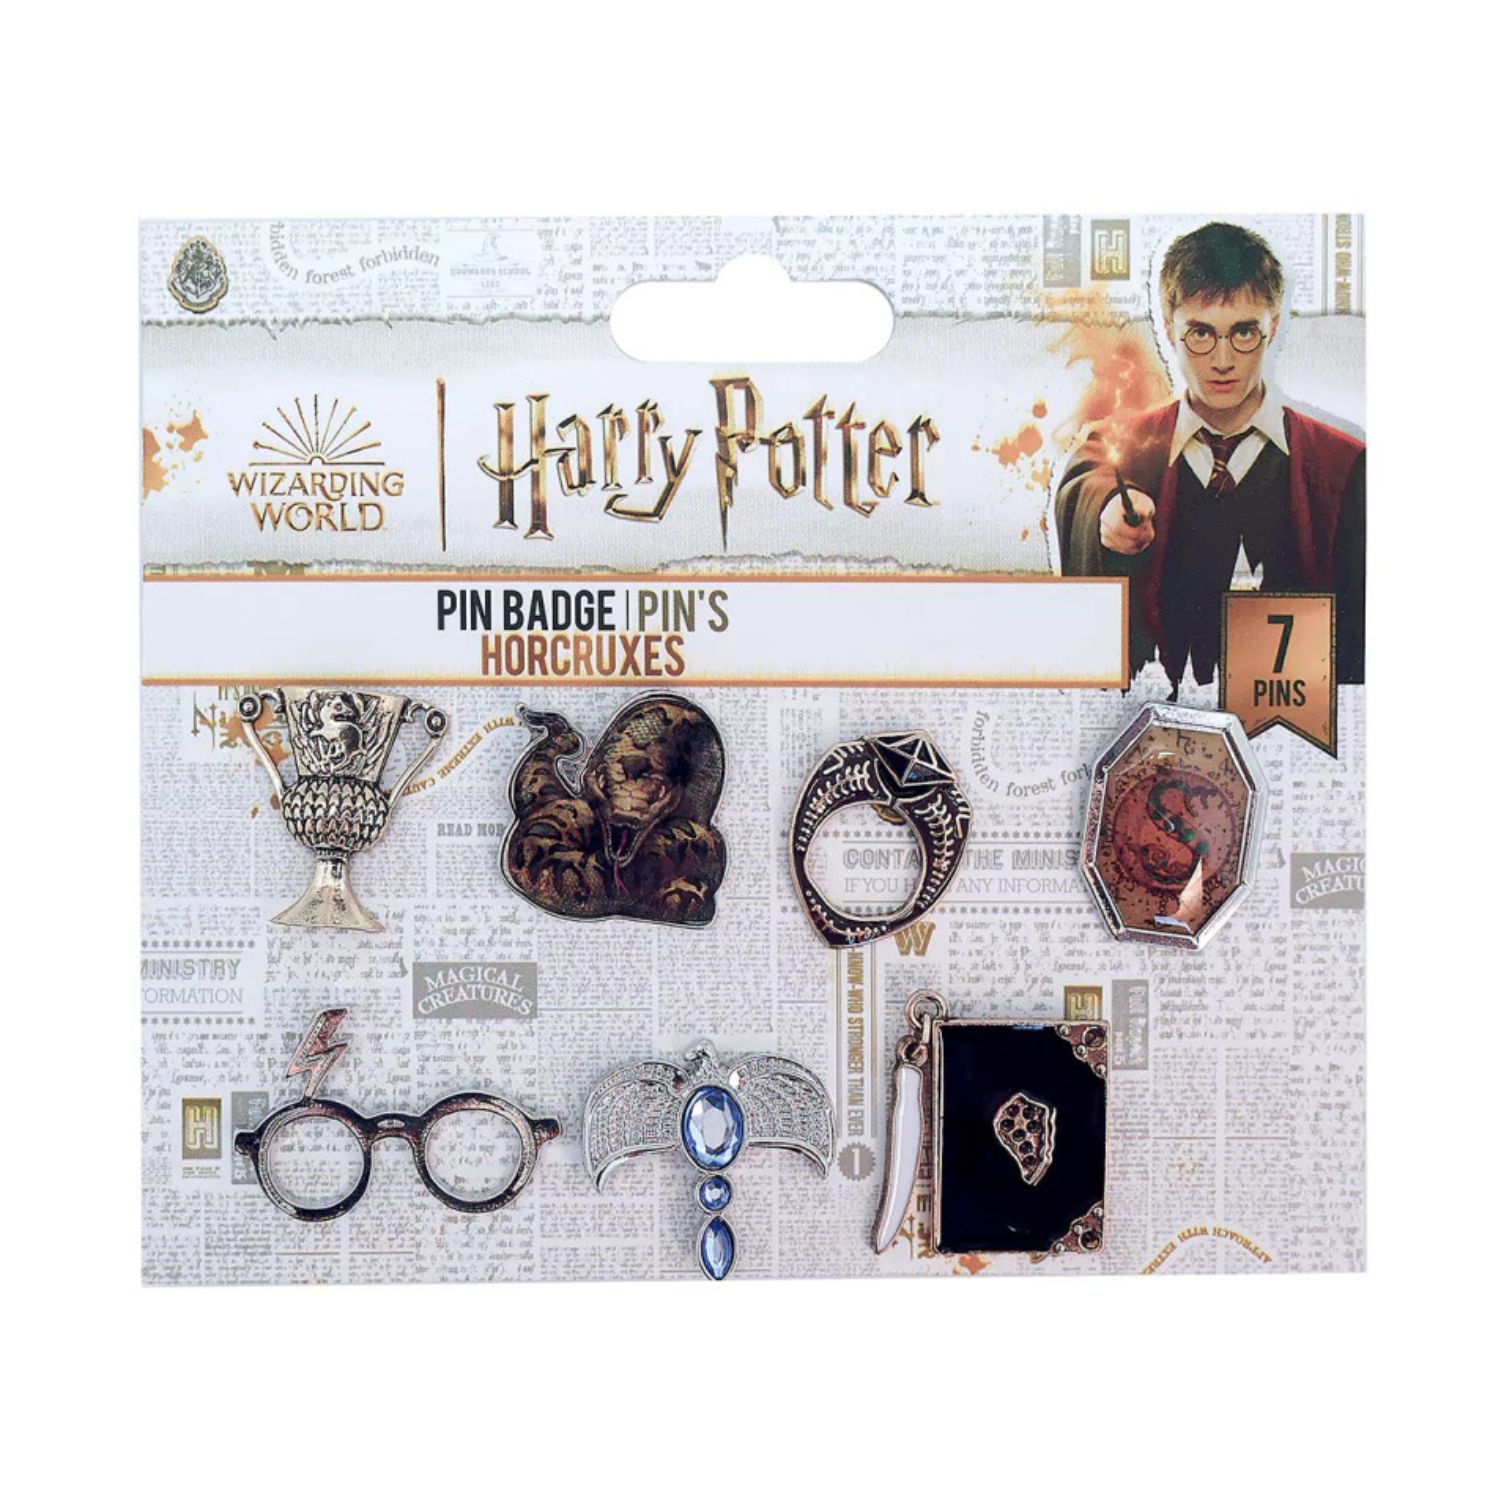 Harry Potter Horcruxes Pin Badges